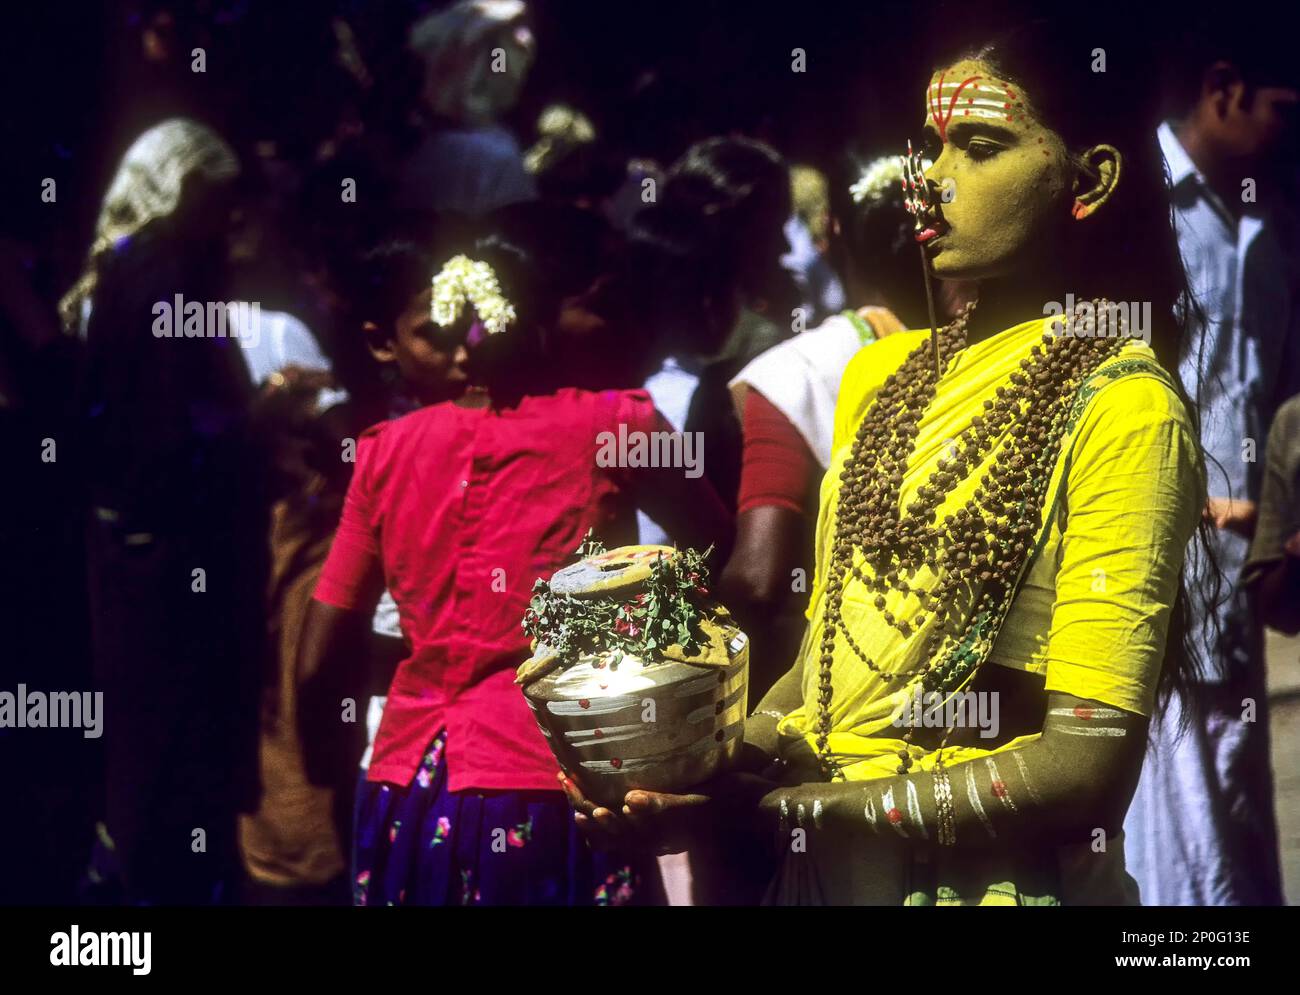 Godly Attire Shiva devotee with pierced tongue and the symbol of Shiva the trident in Kodungallur, Kerala, South India, India, Asia Stock Photo